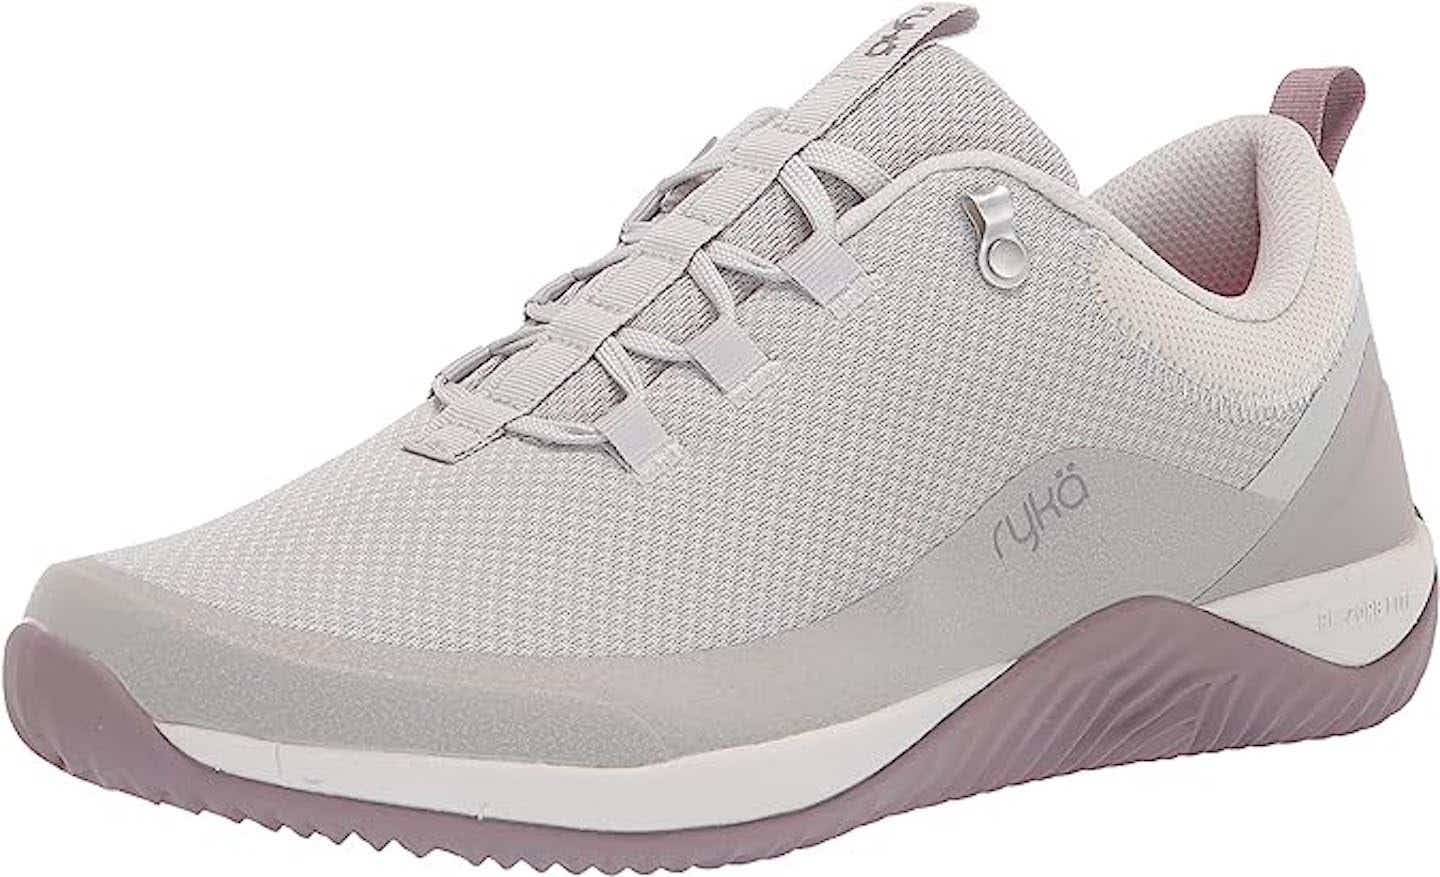 10 Best Walking Shoes for Women 2023 - Stylish & Comfy Sneakers